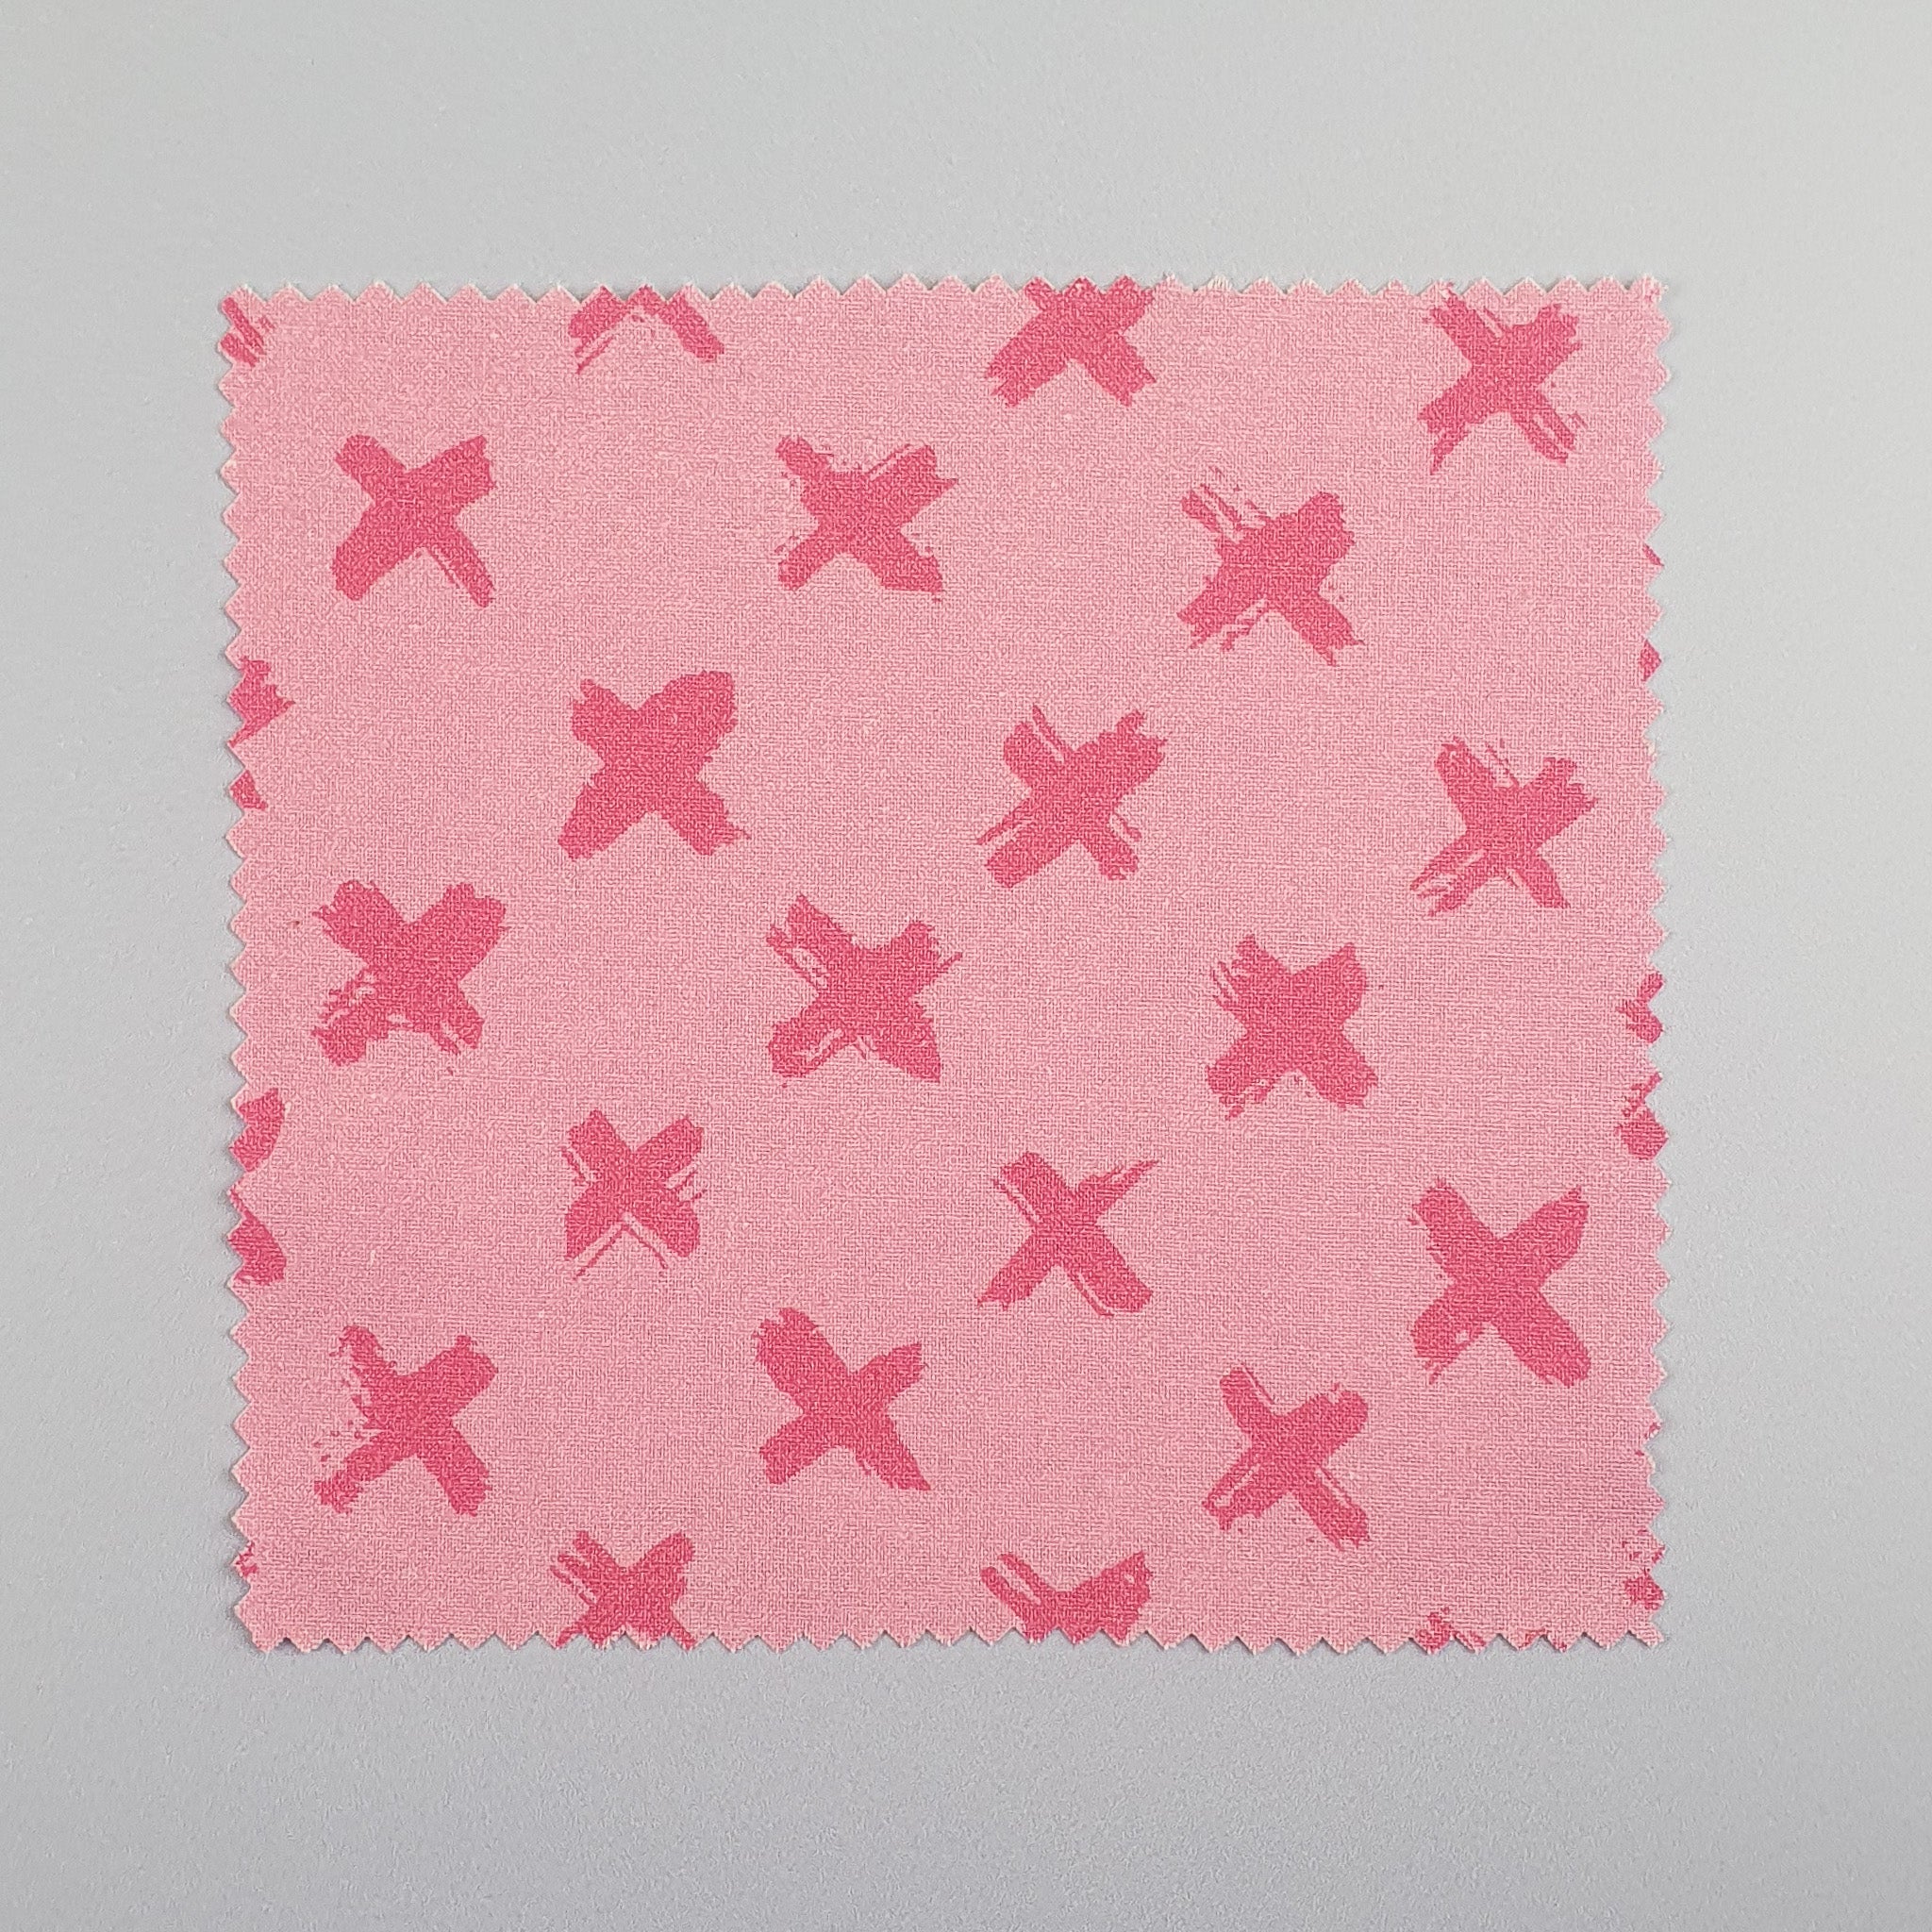 Grime Guard Pink Crosses Fabric Swatch